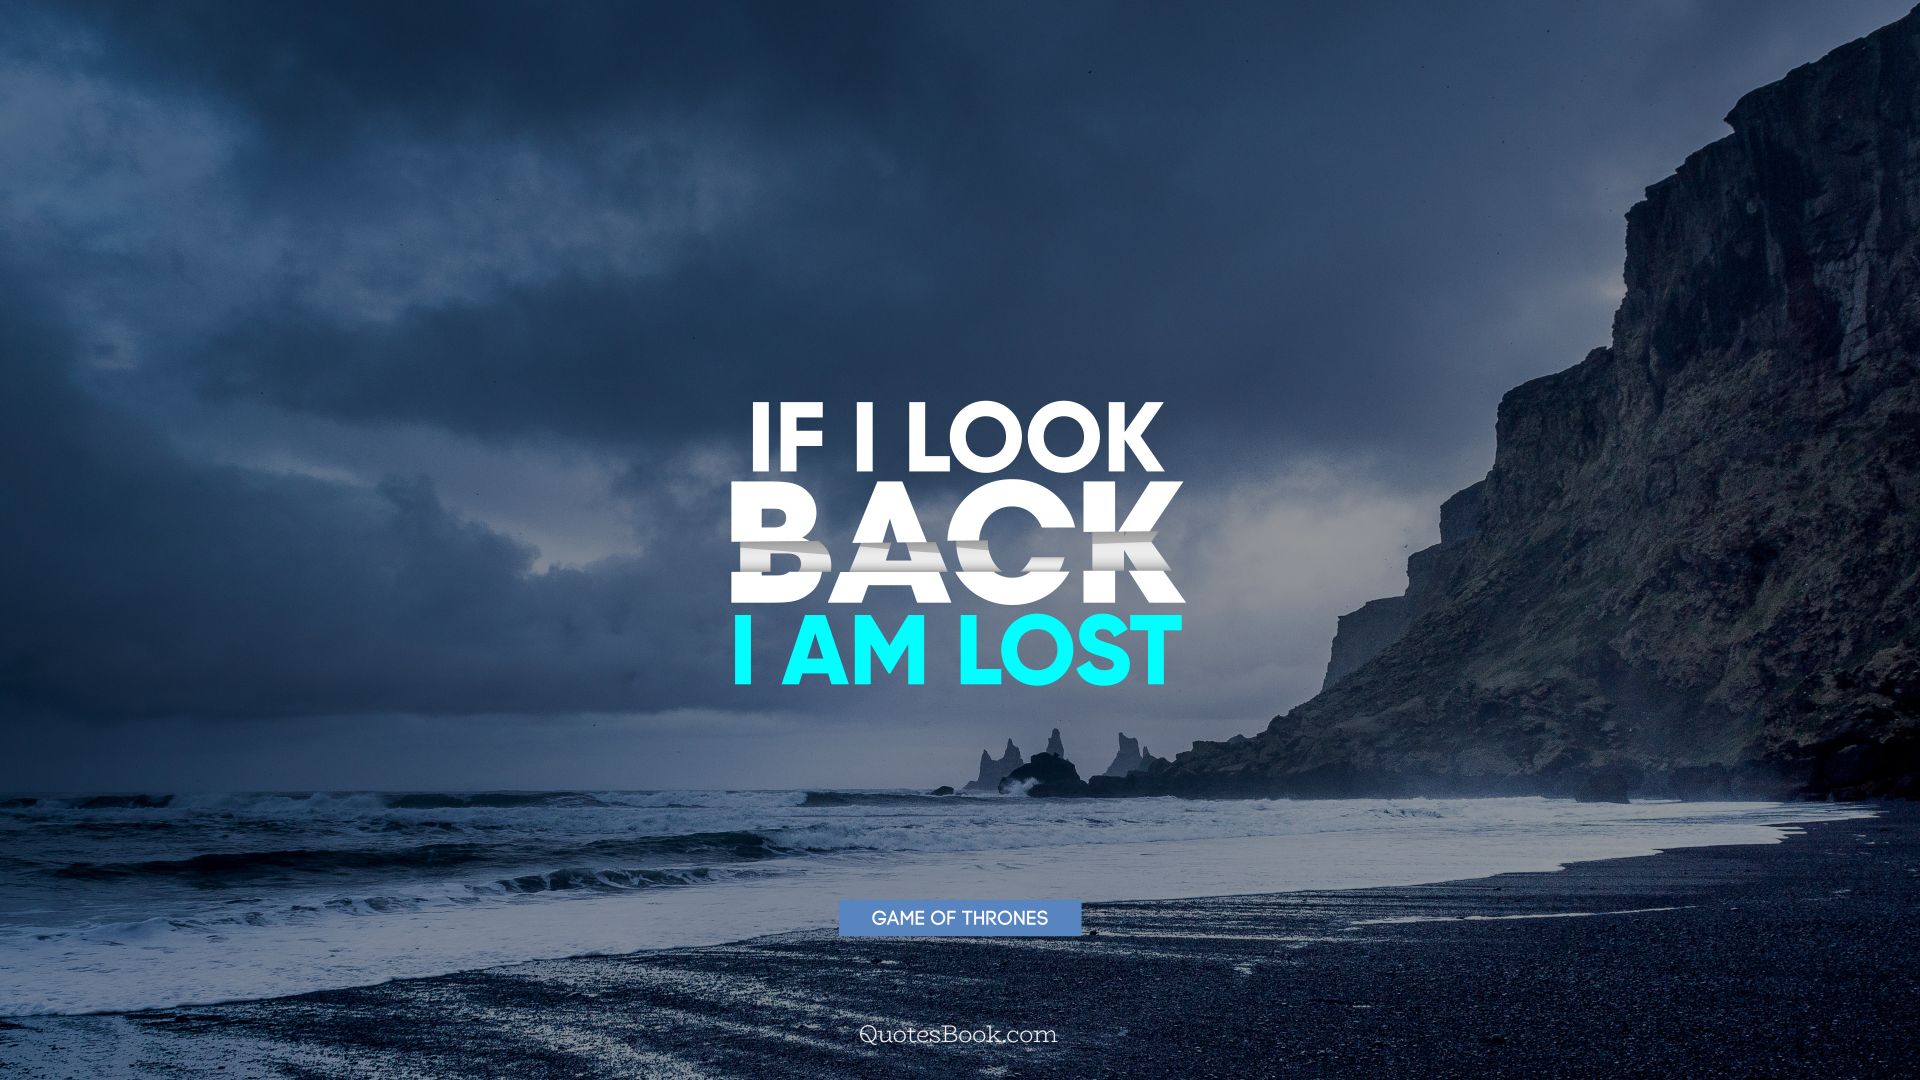 If I look back I am lost. - Quote by George R.R. Martin